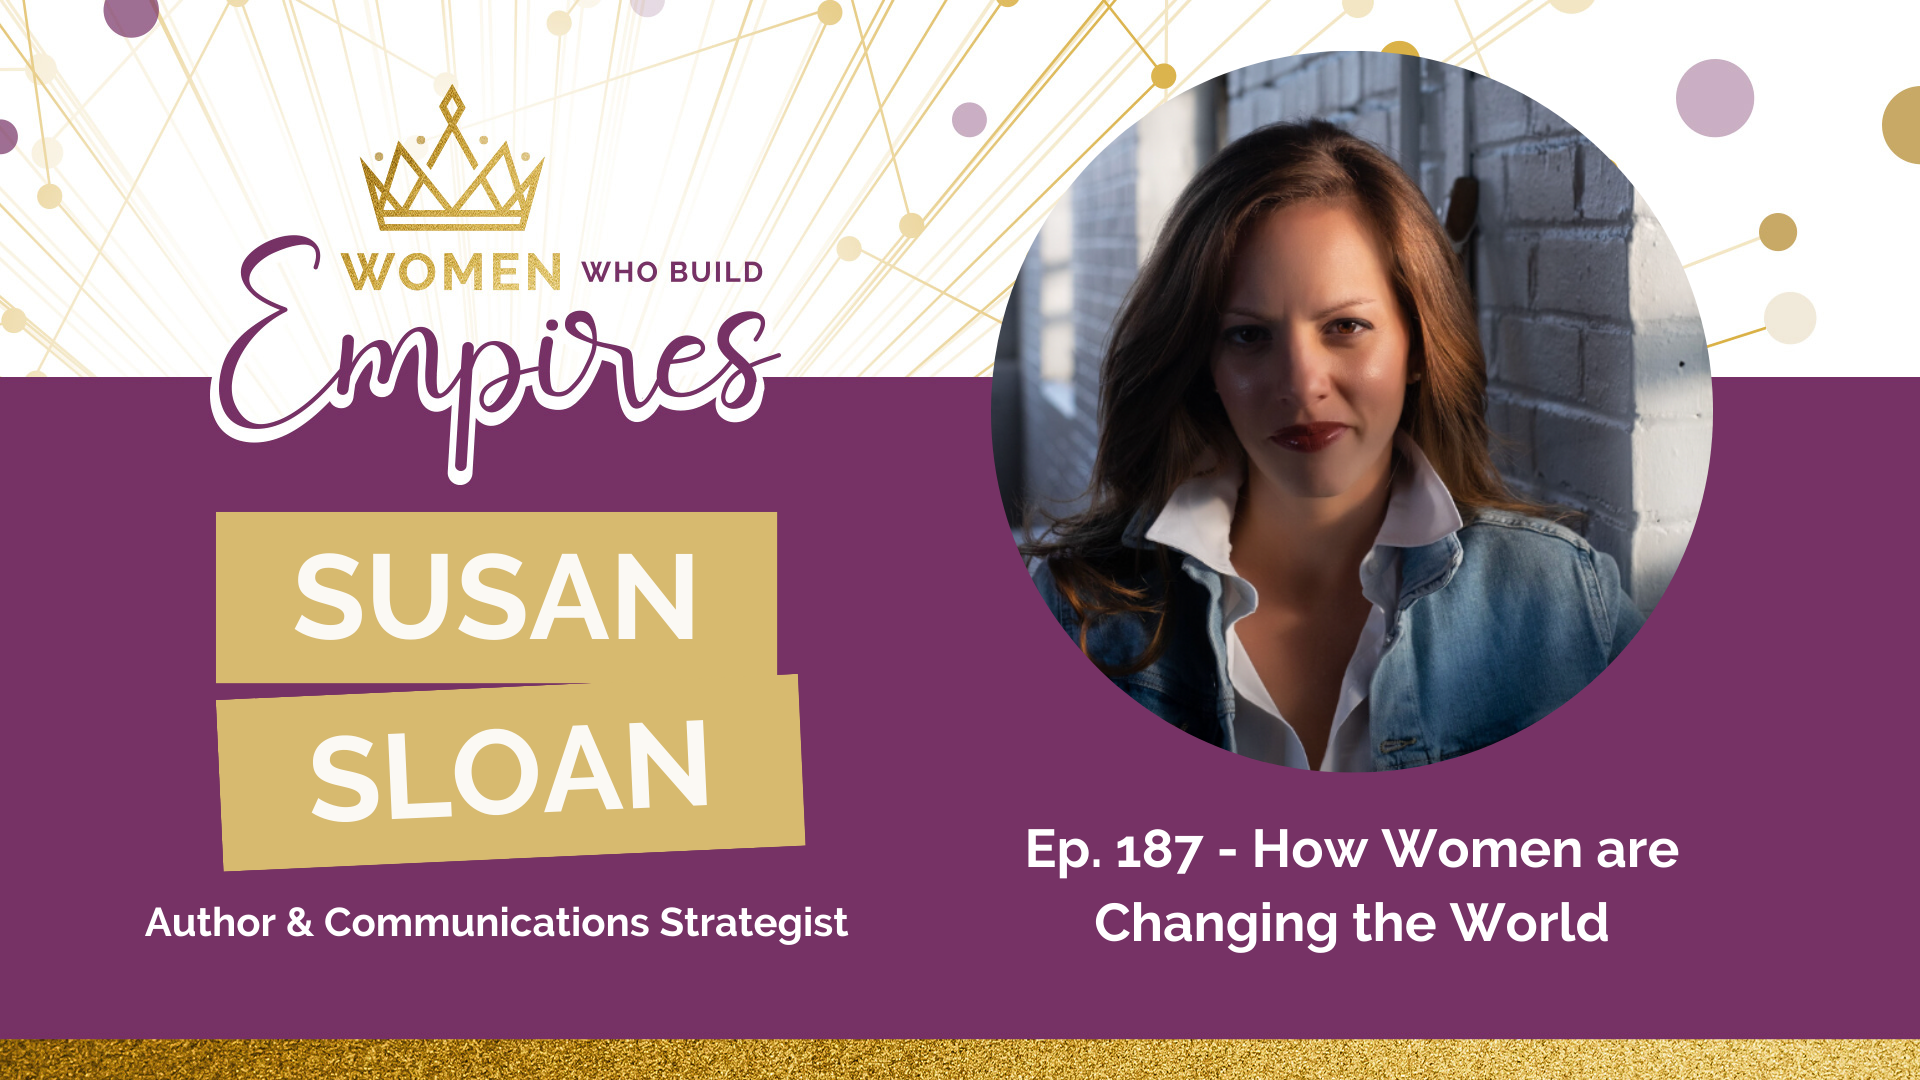 Ep. 187 Susan Sloan: How Women are Changing the World